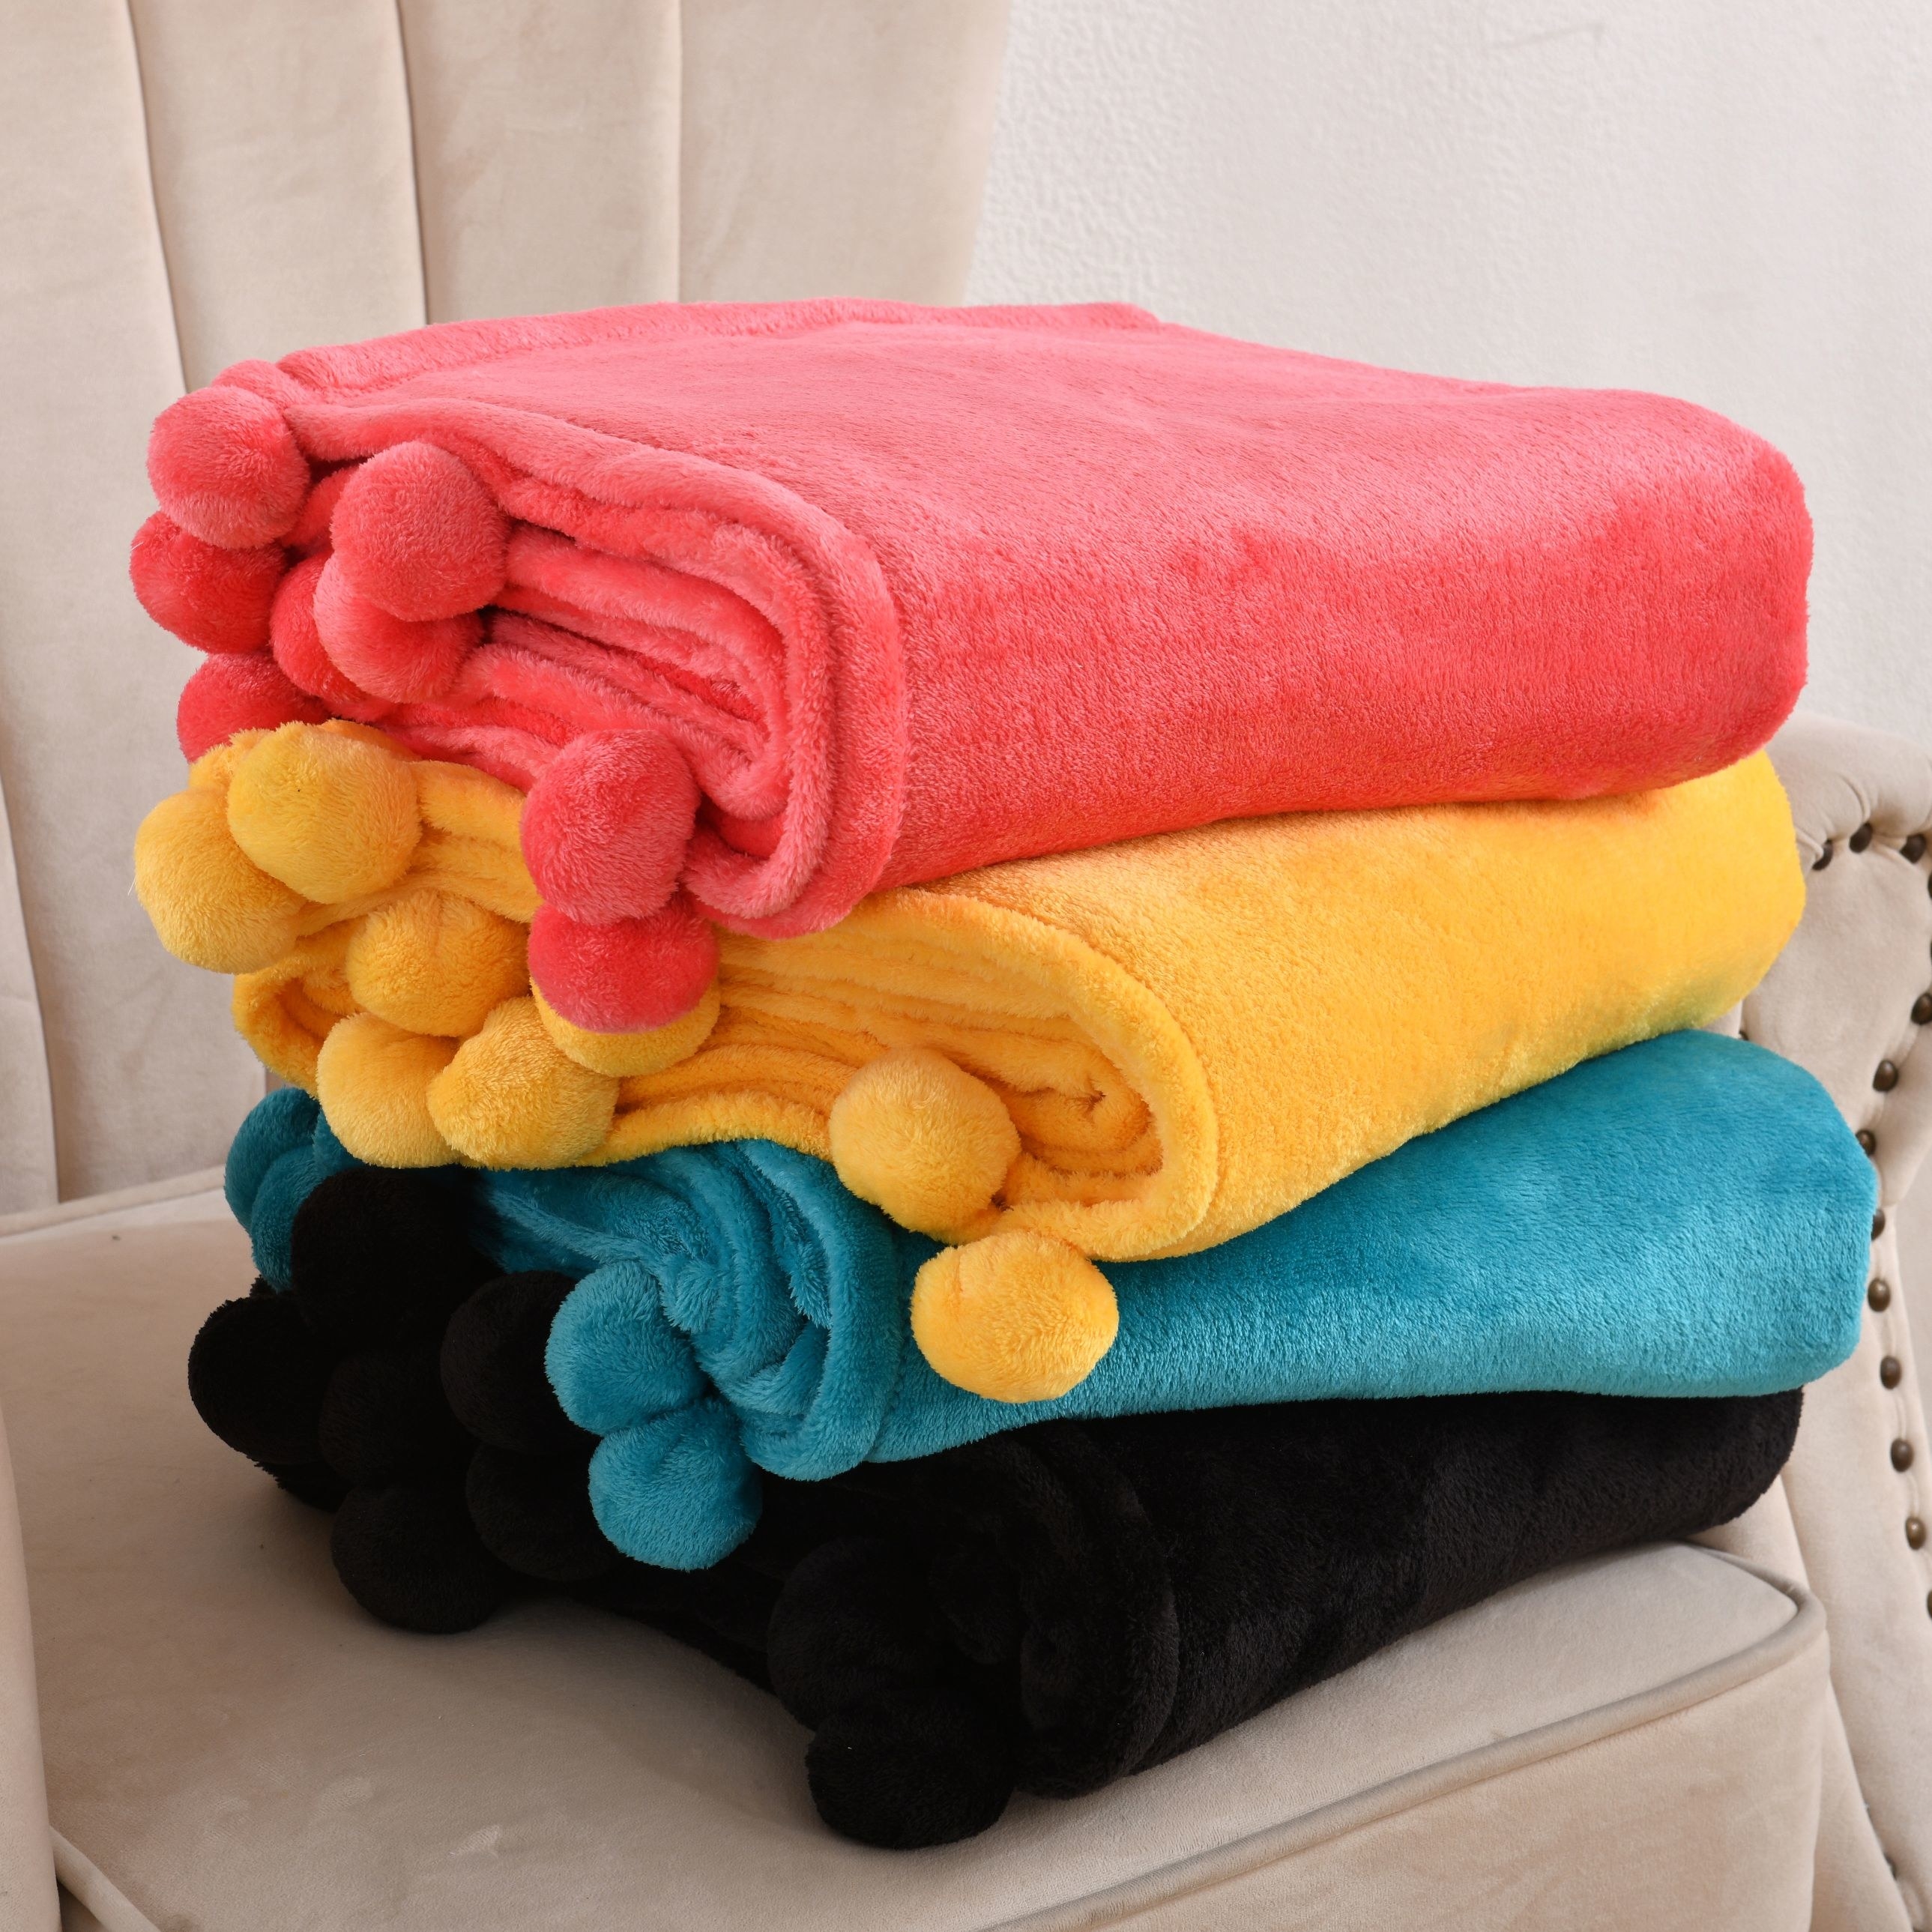 four of the blanket stacked in black, blue, yellow, pink